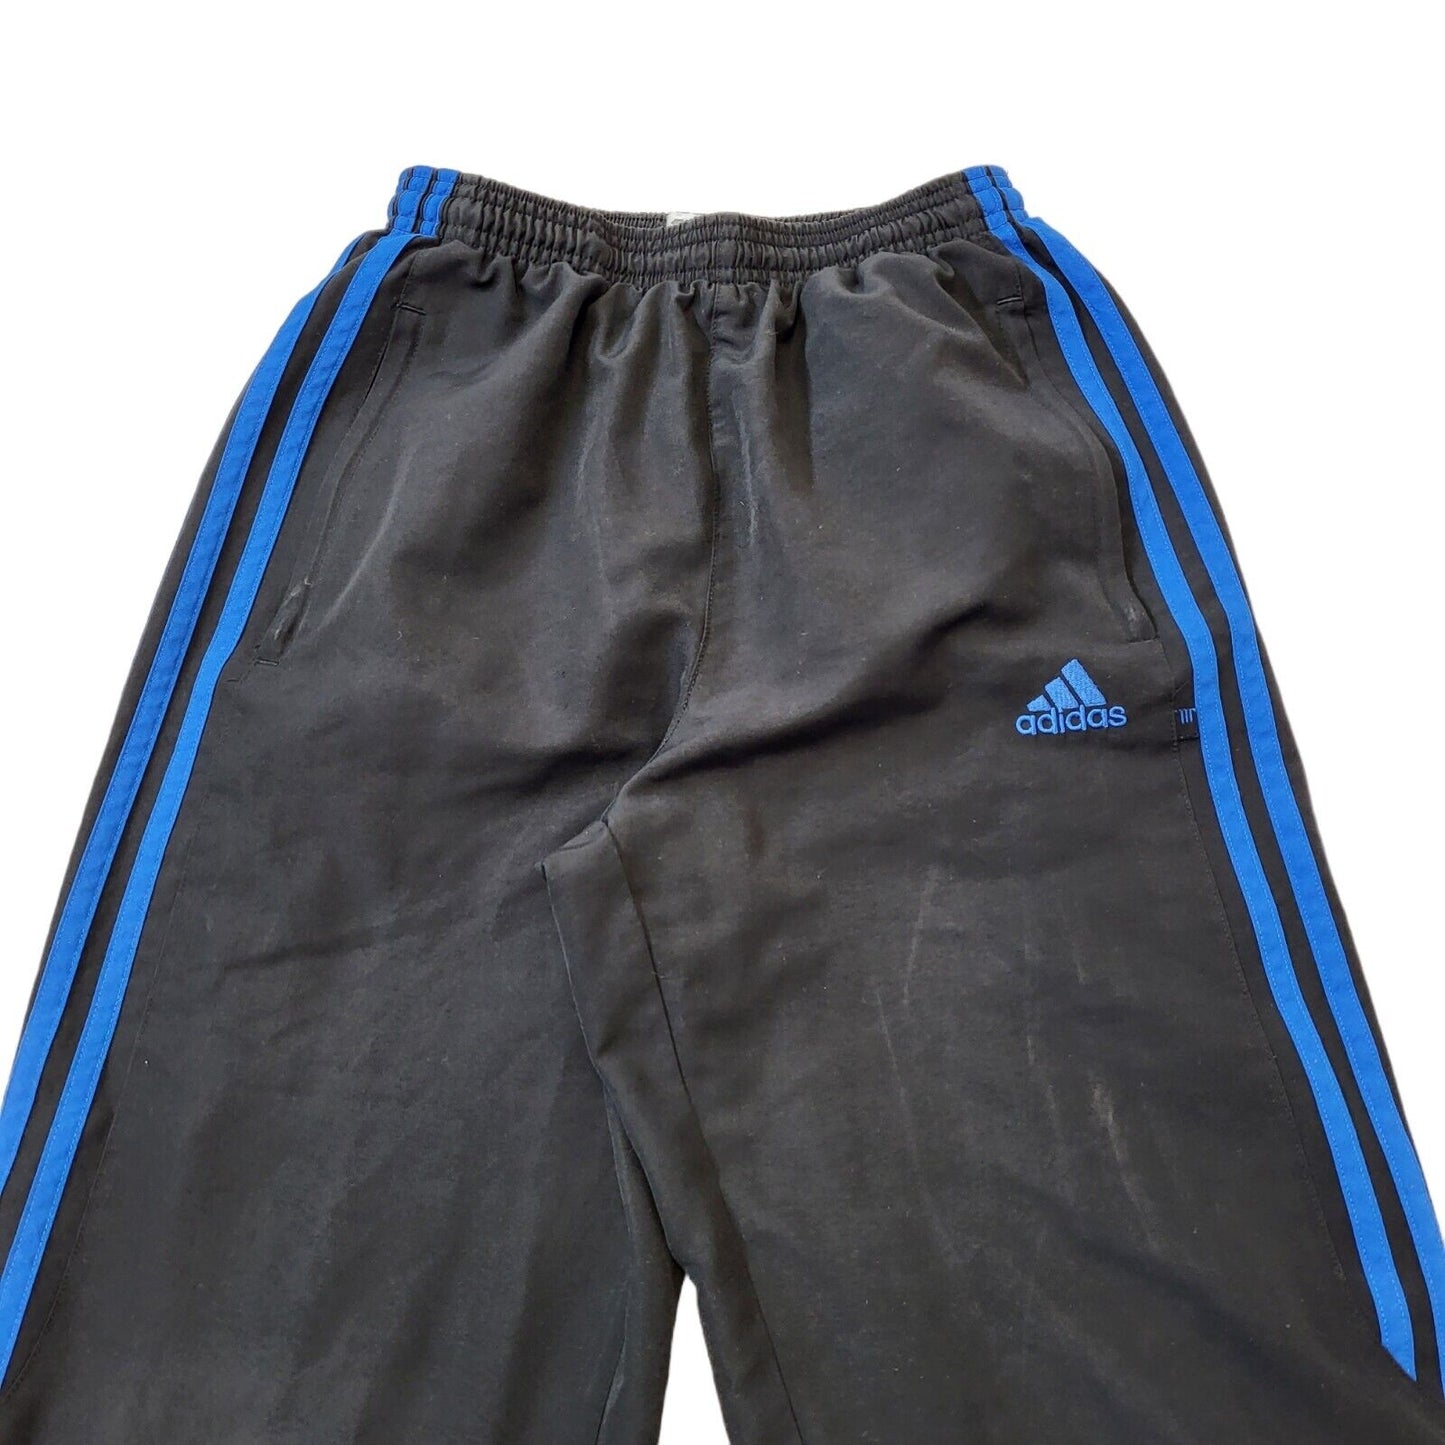 Adidas Trousers (2XS)